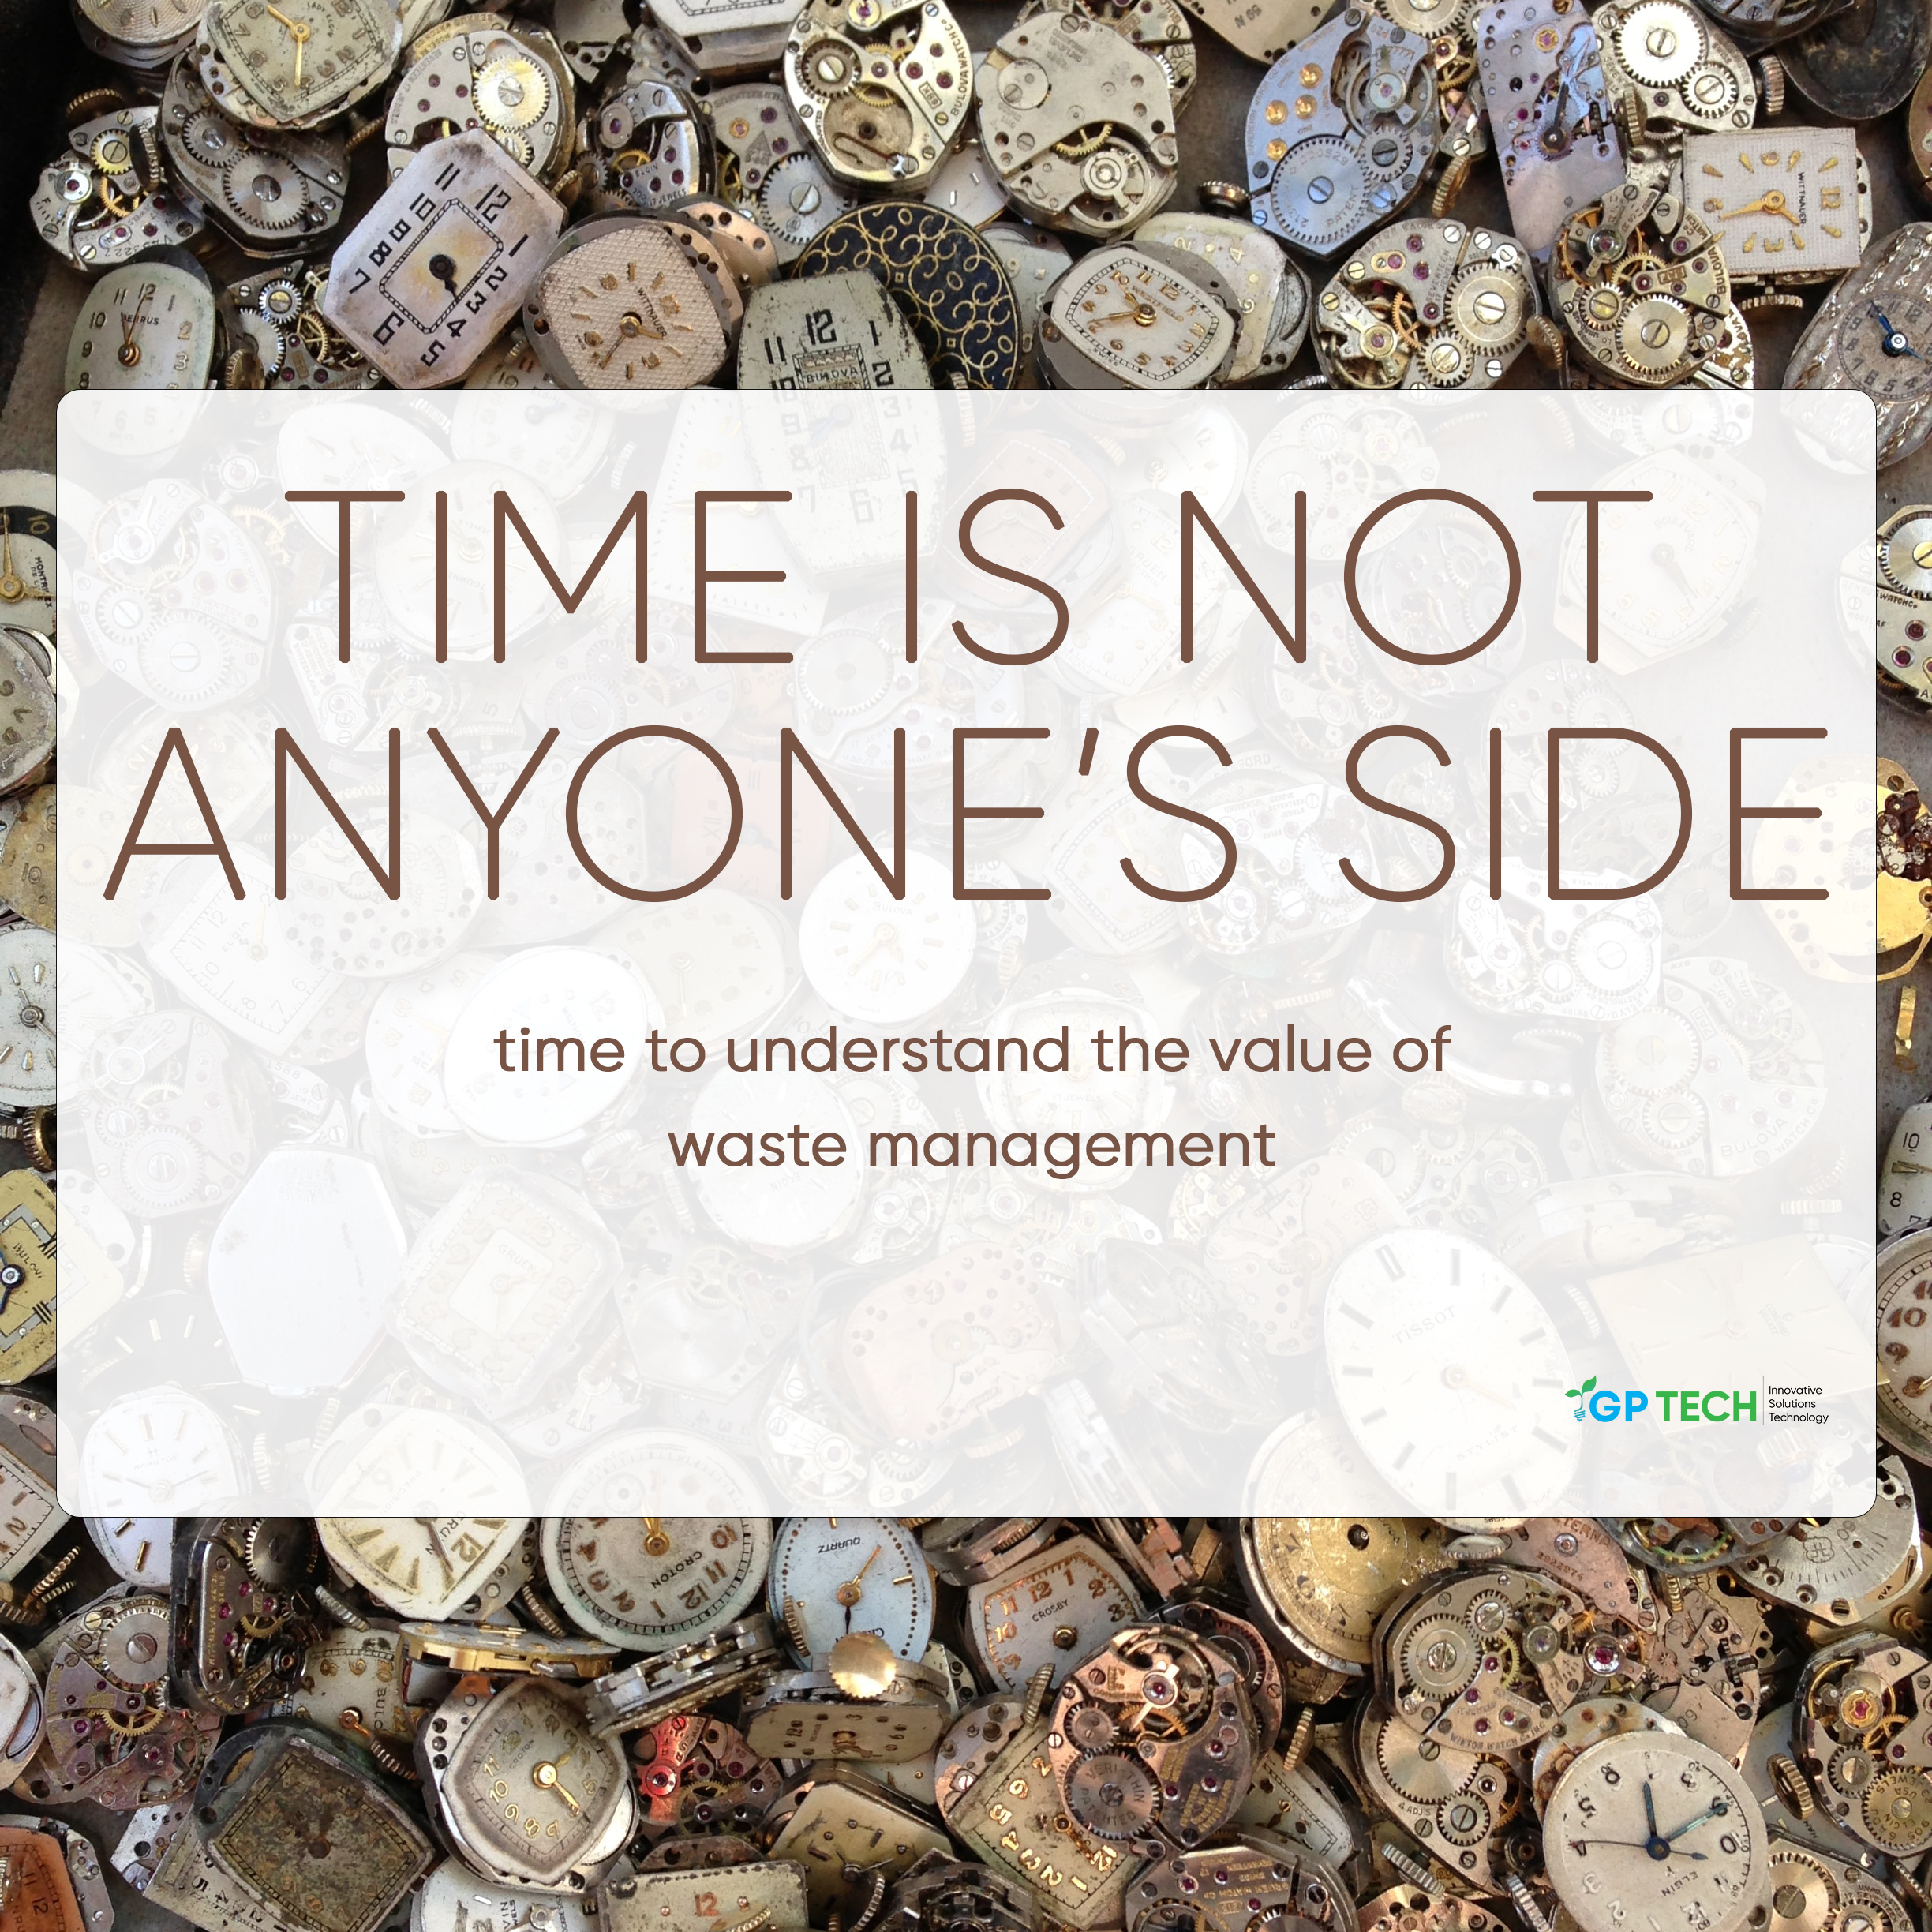 Time to understand the value of waste management